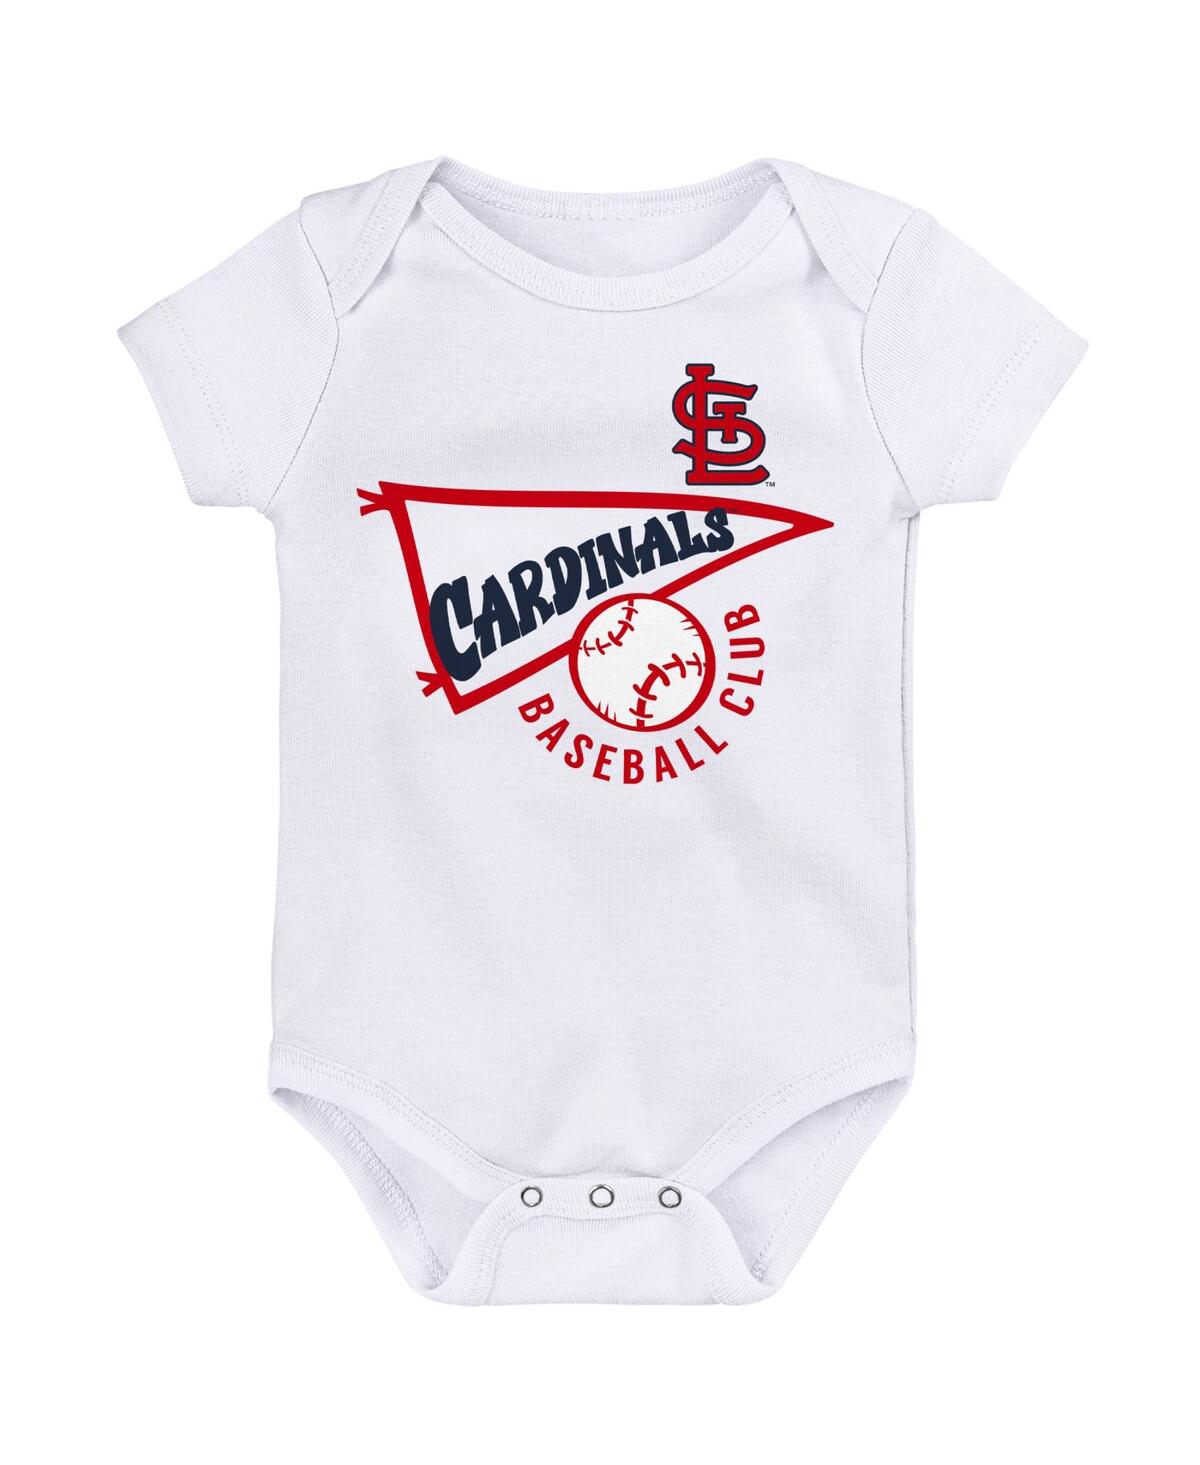 Outerstuff Infant Boys and Girls White Heather Gray St. Louis